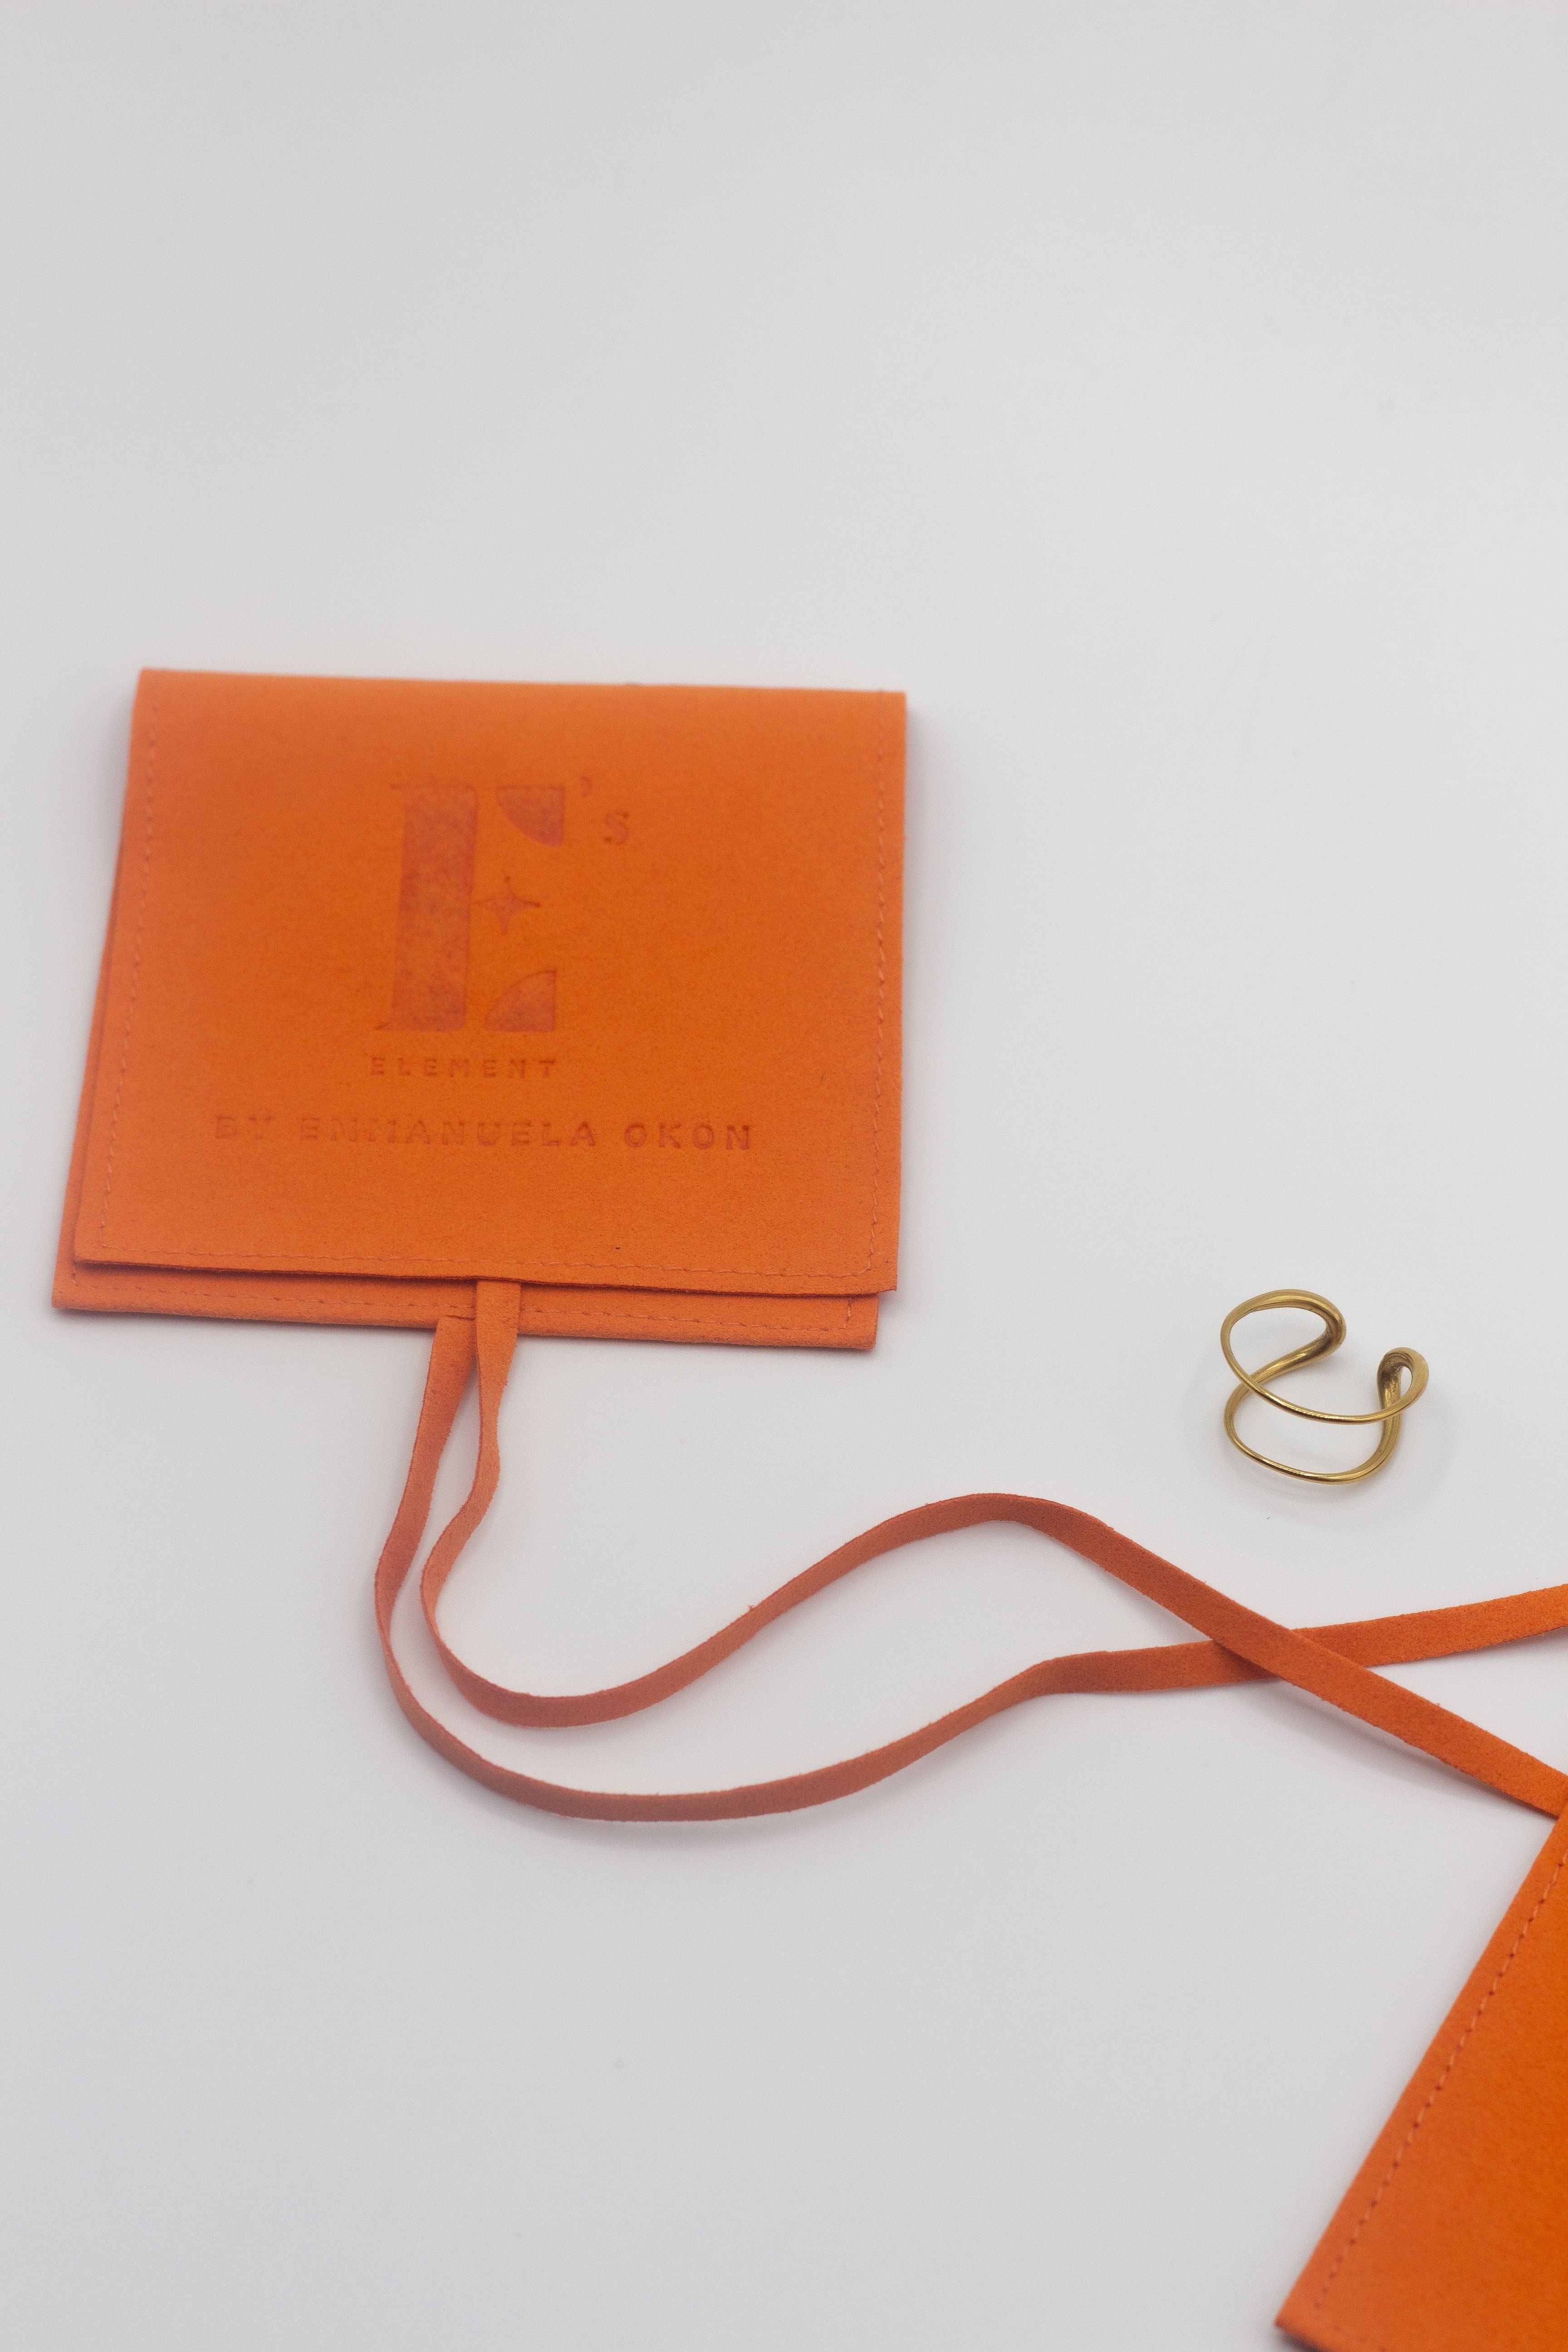 18k gold spiral ear cuff on the right. On the left is an orange leather pouch with the E's Element Logo engraved. Unisex Spiral Ear Cuffs - E's Element.